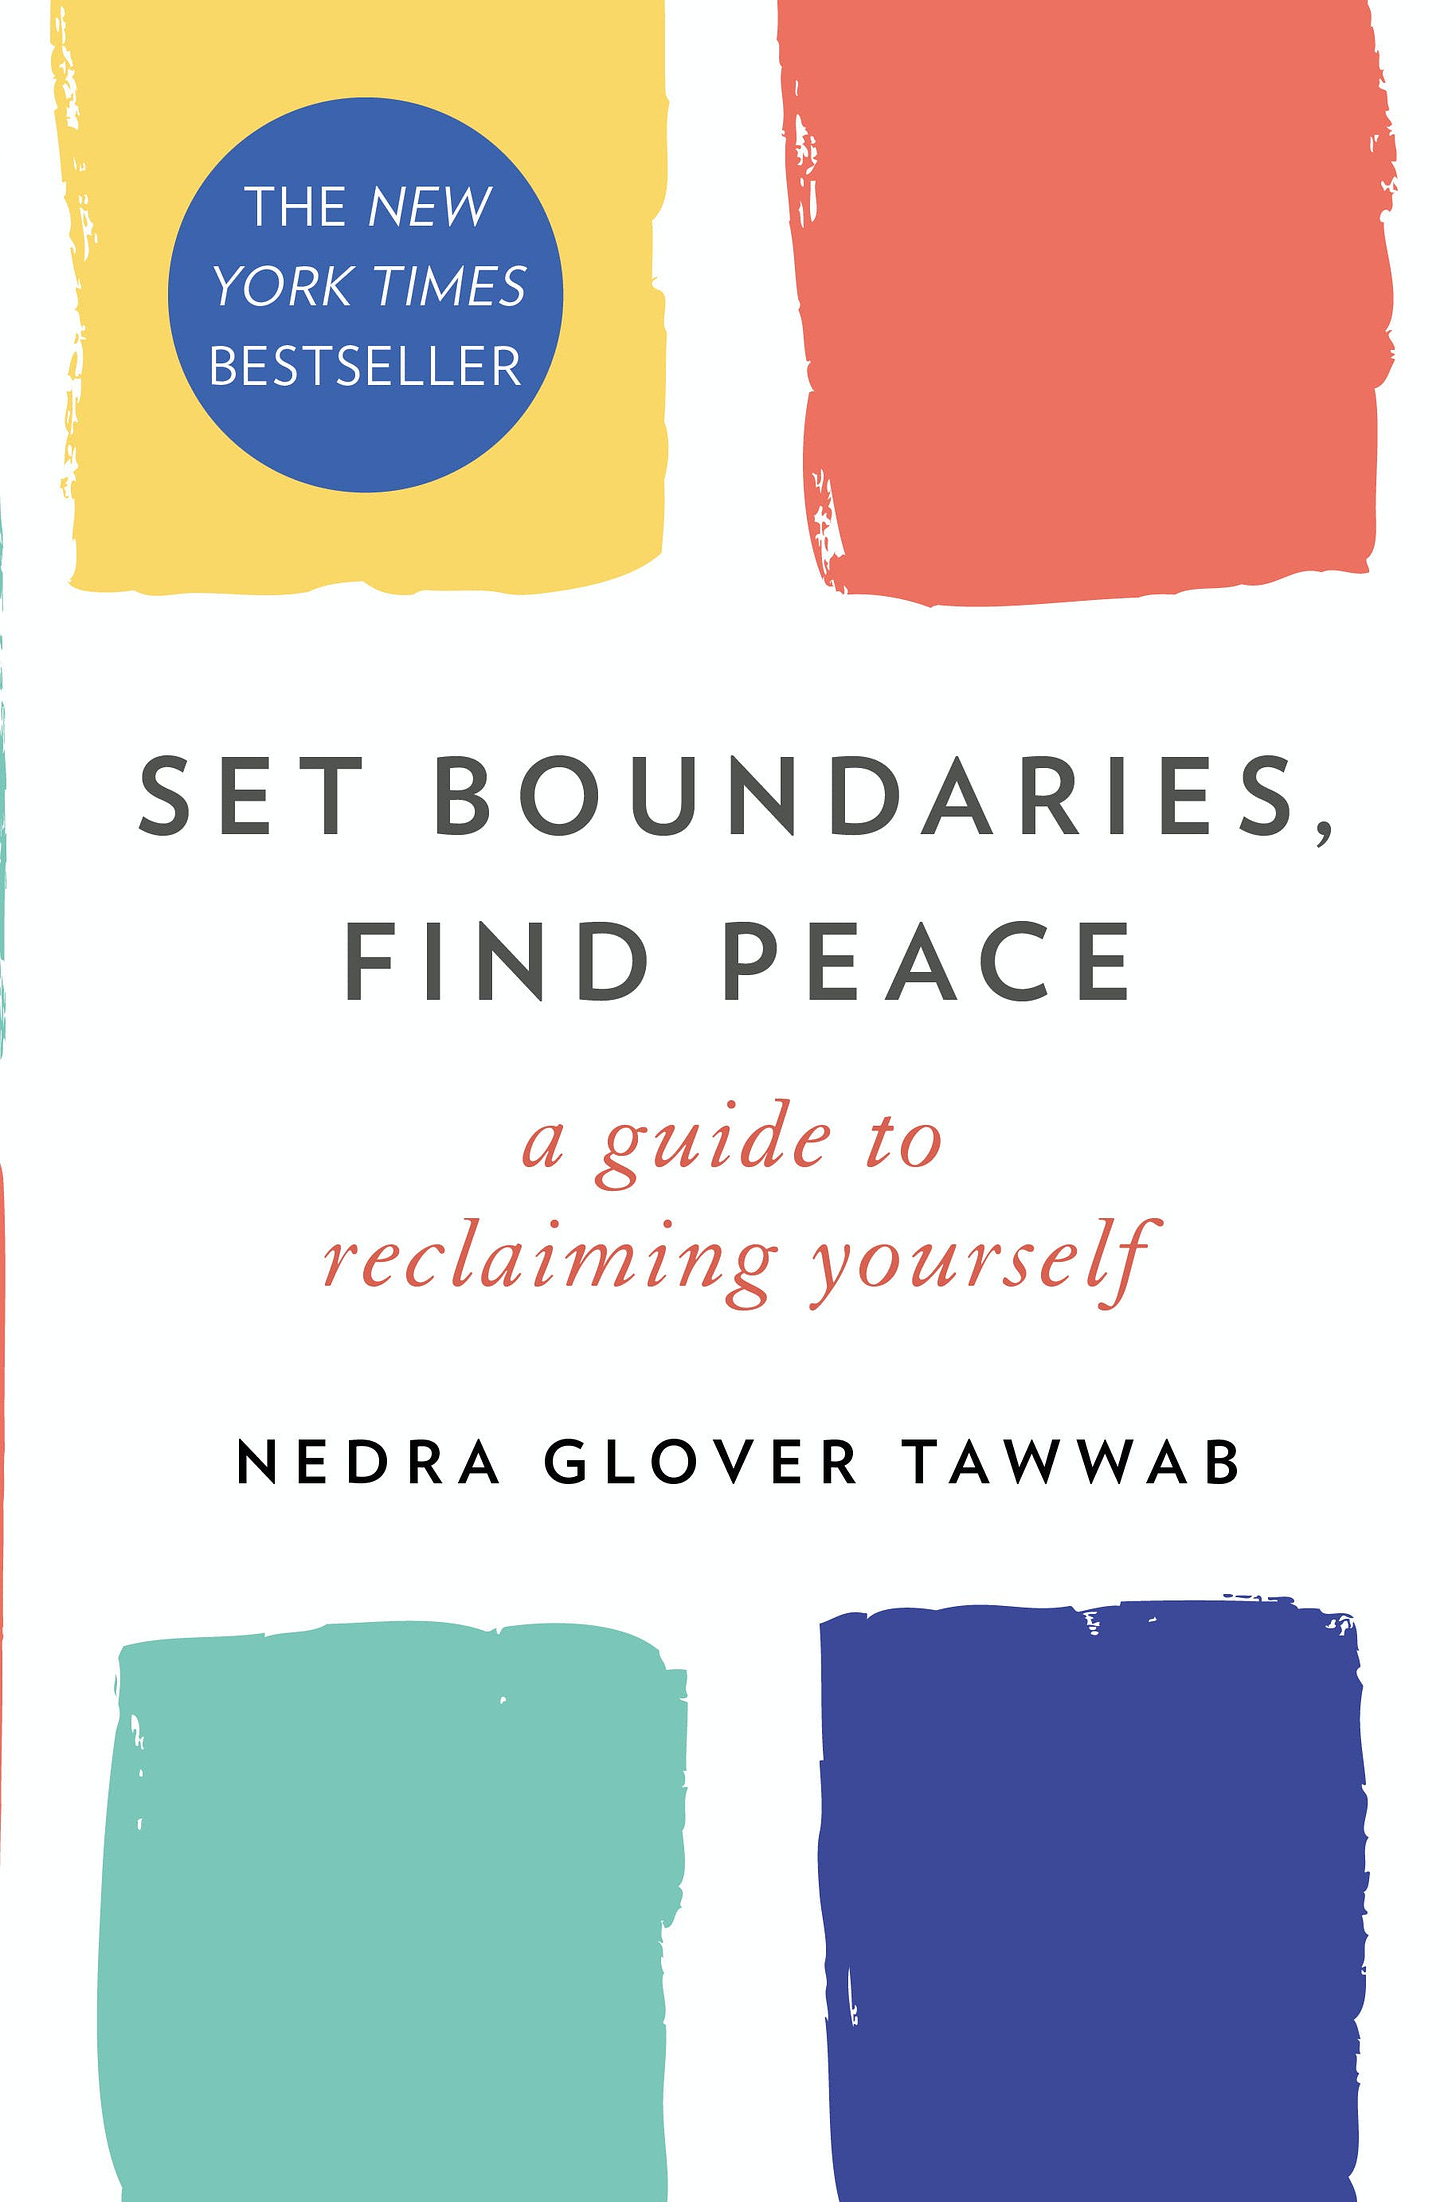 The cover of the book Set boundaries, find peace